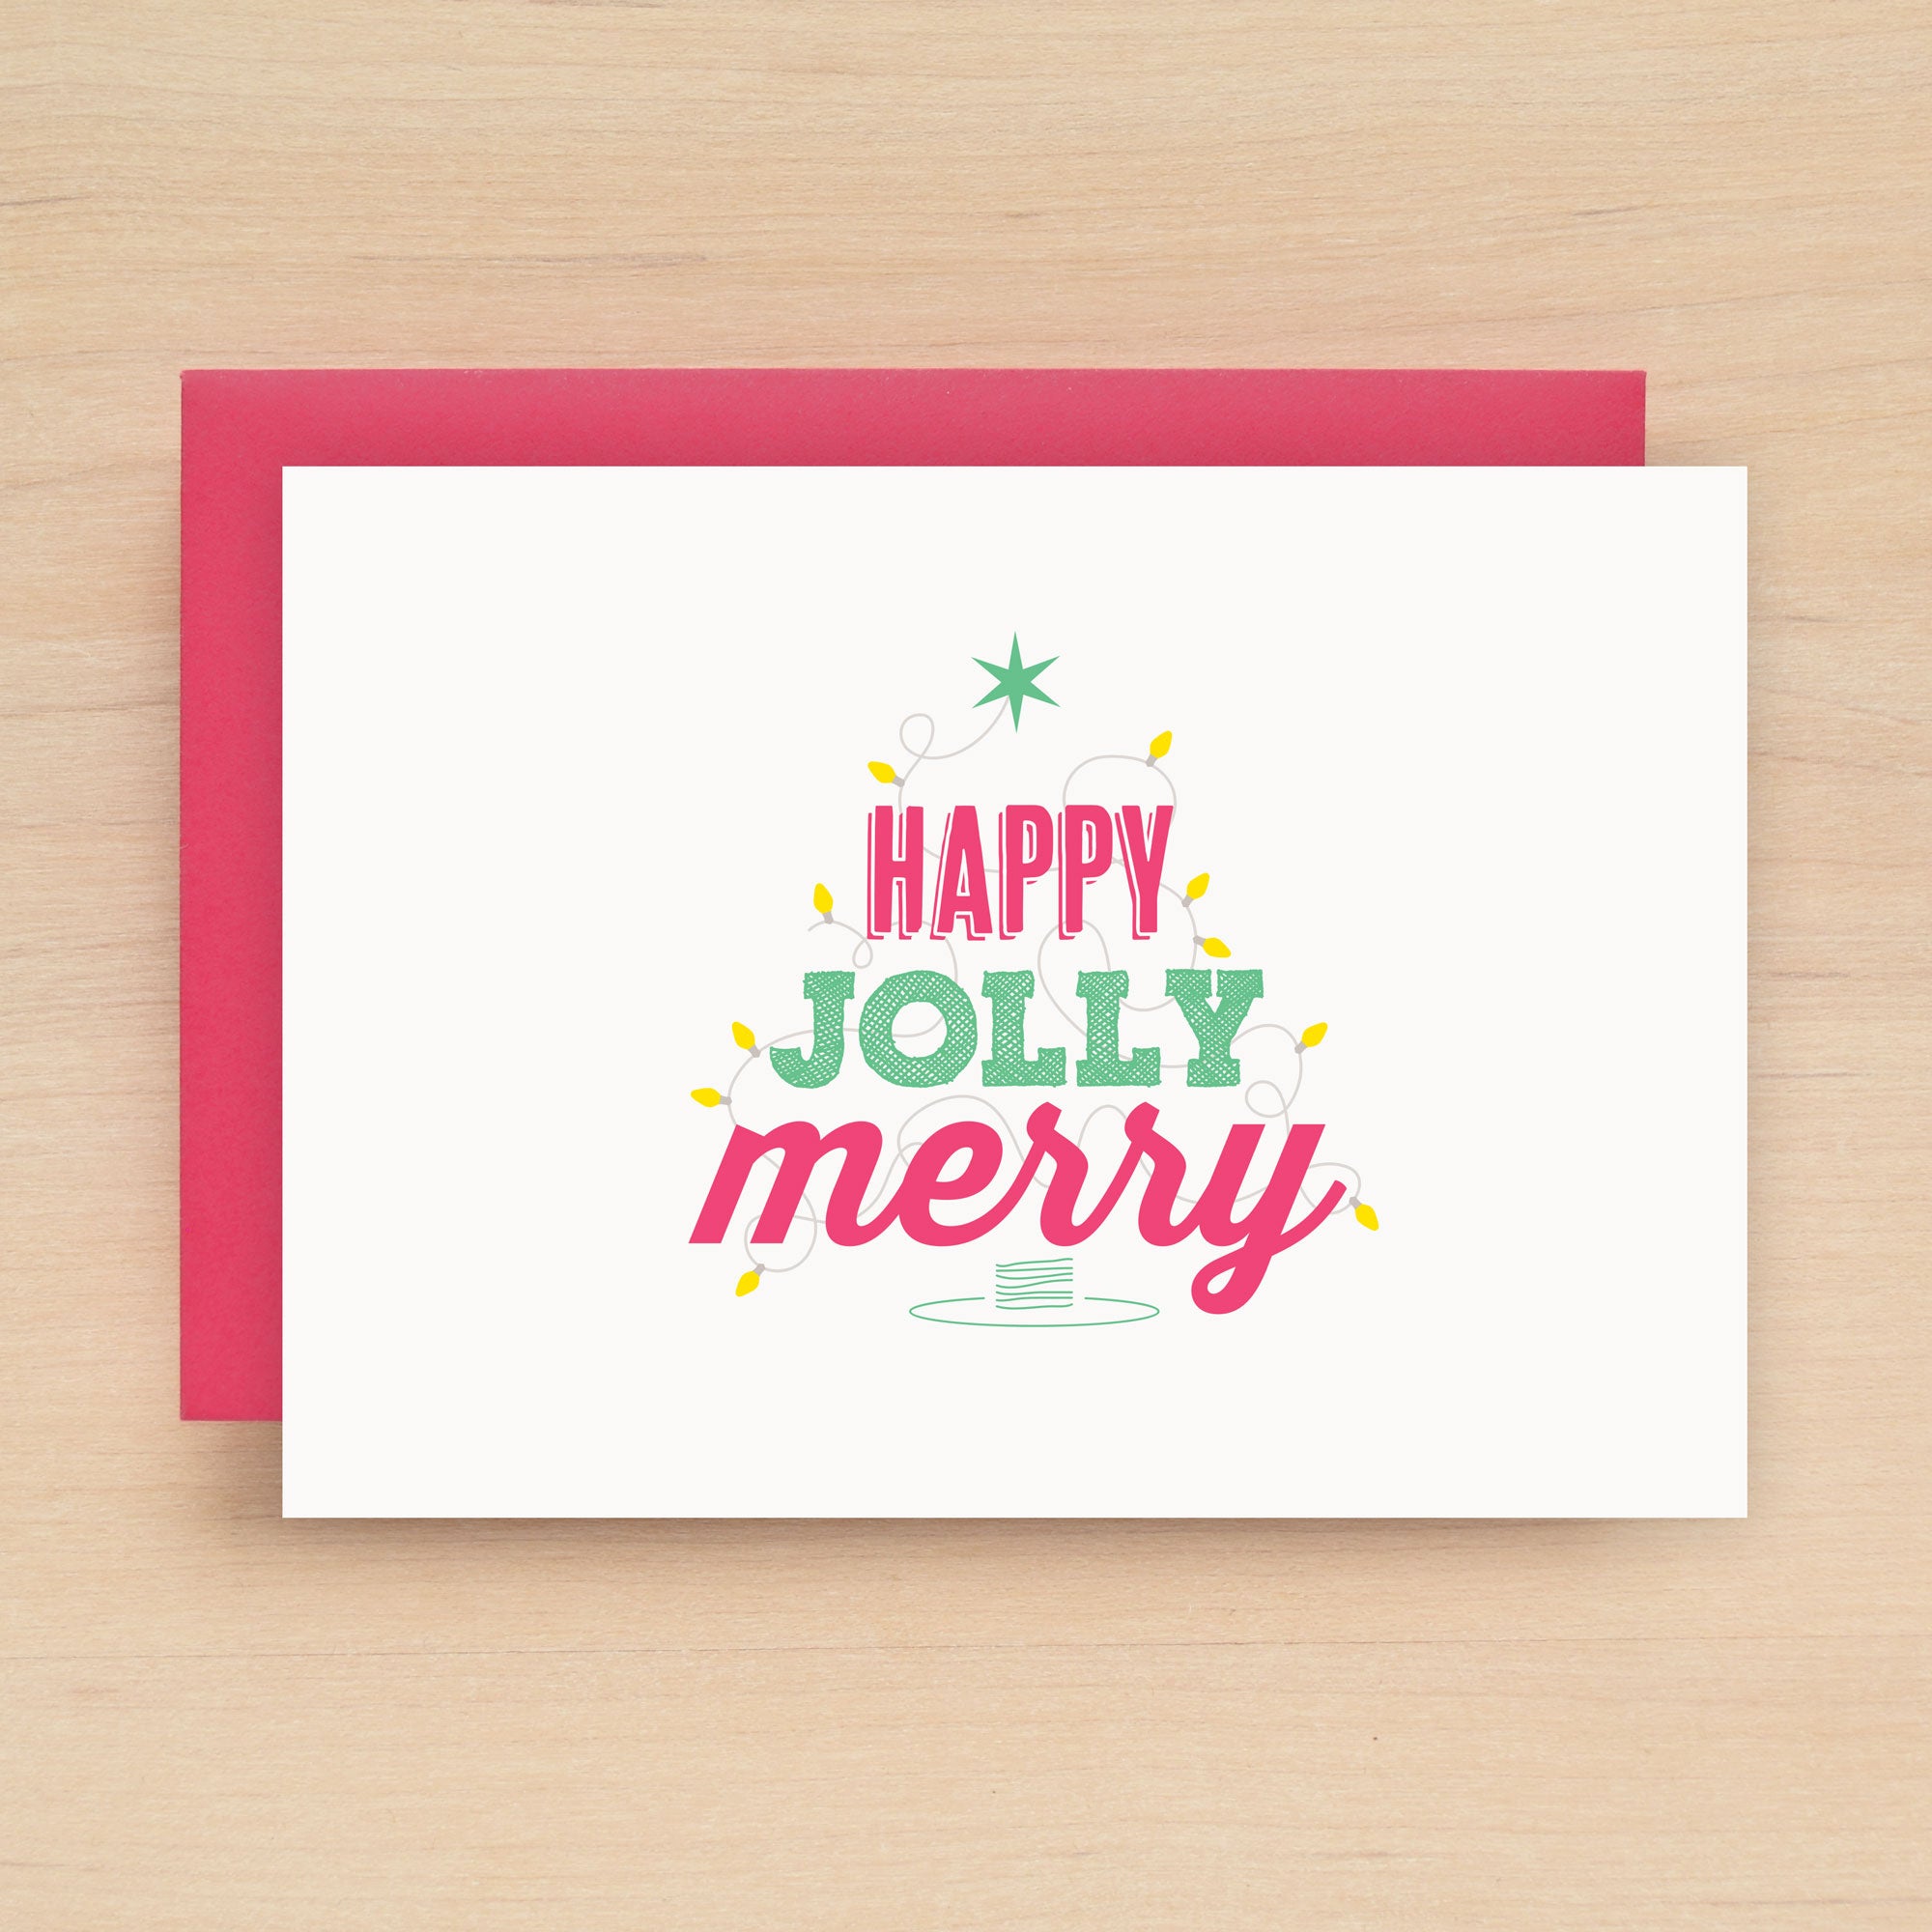 HappyJollyMerry Holiday Card Set of 10